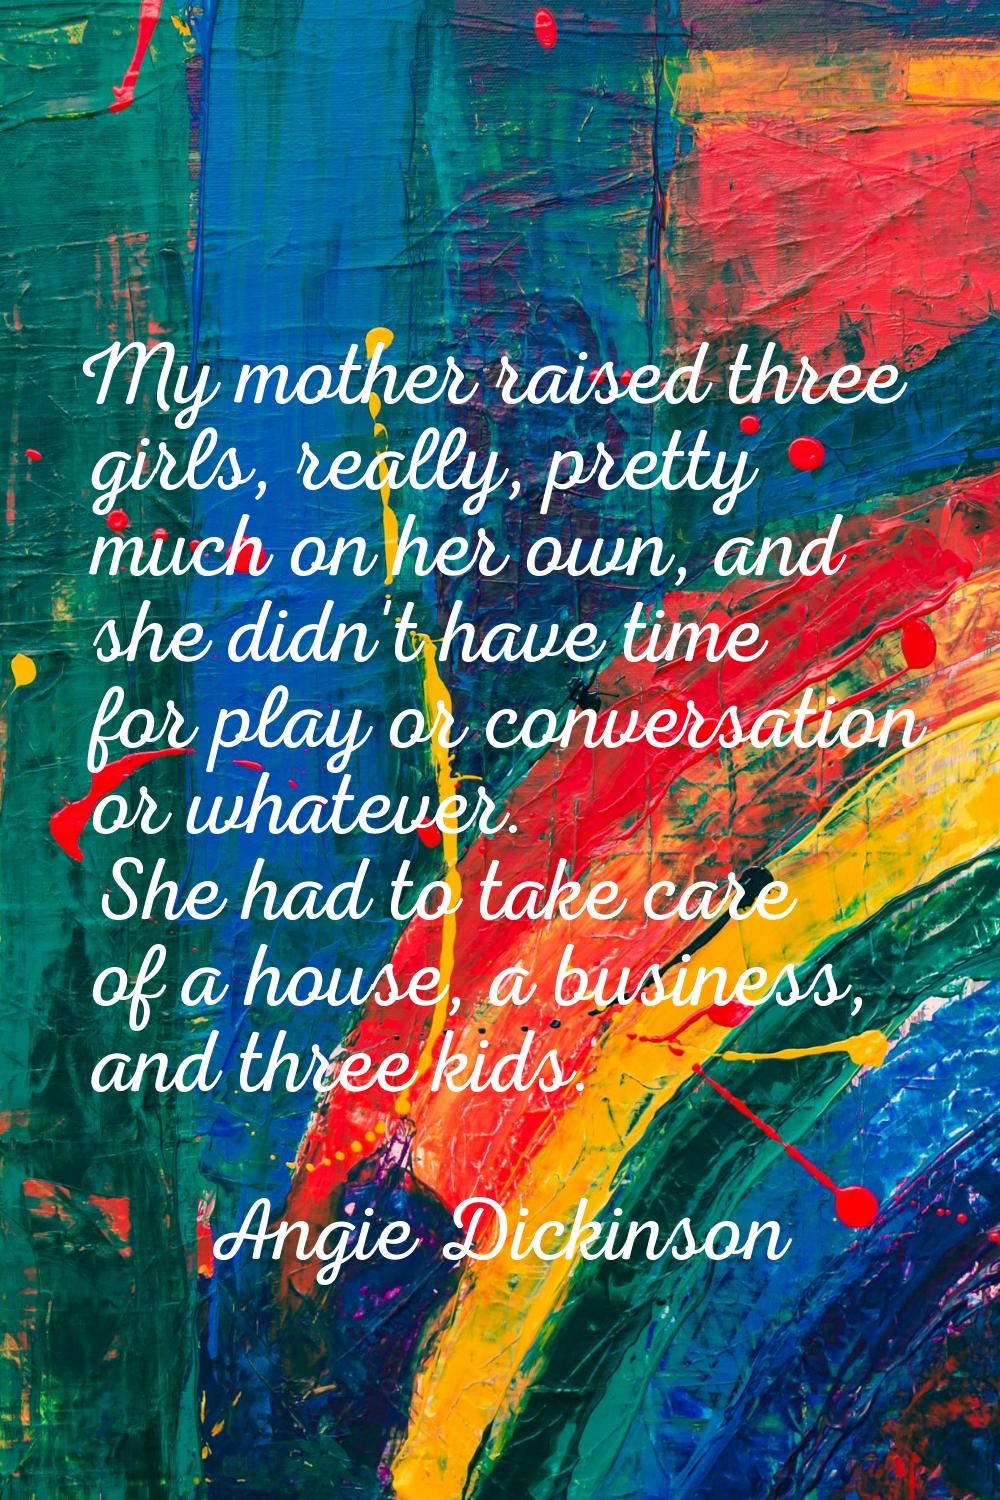 My mother raised three girls, really, pretty much on her own, and she didn't have time for play or 